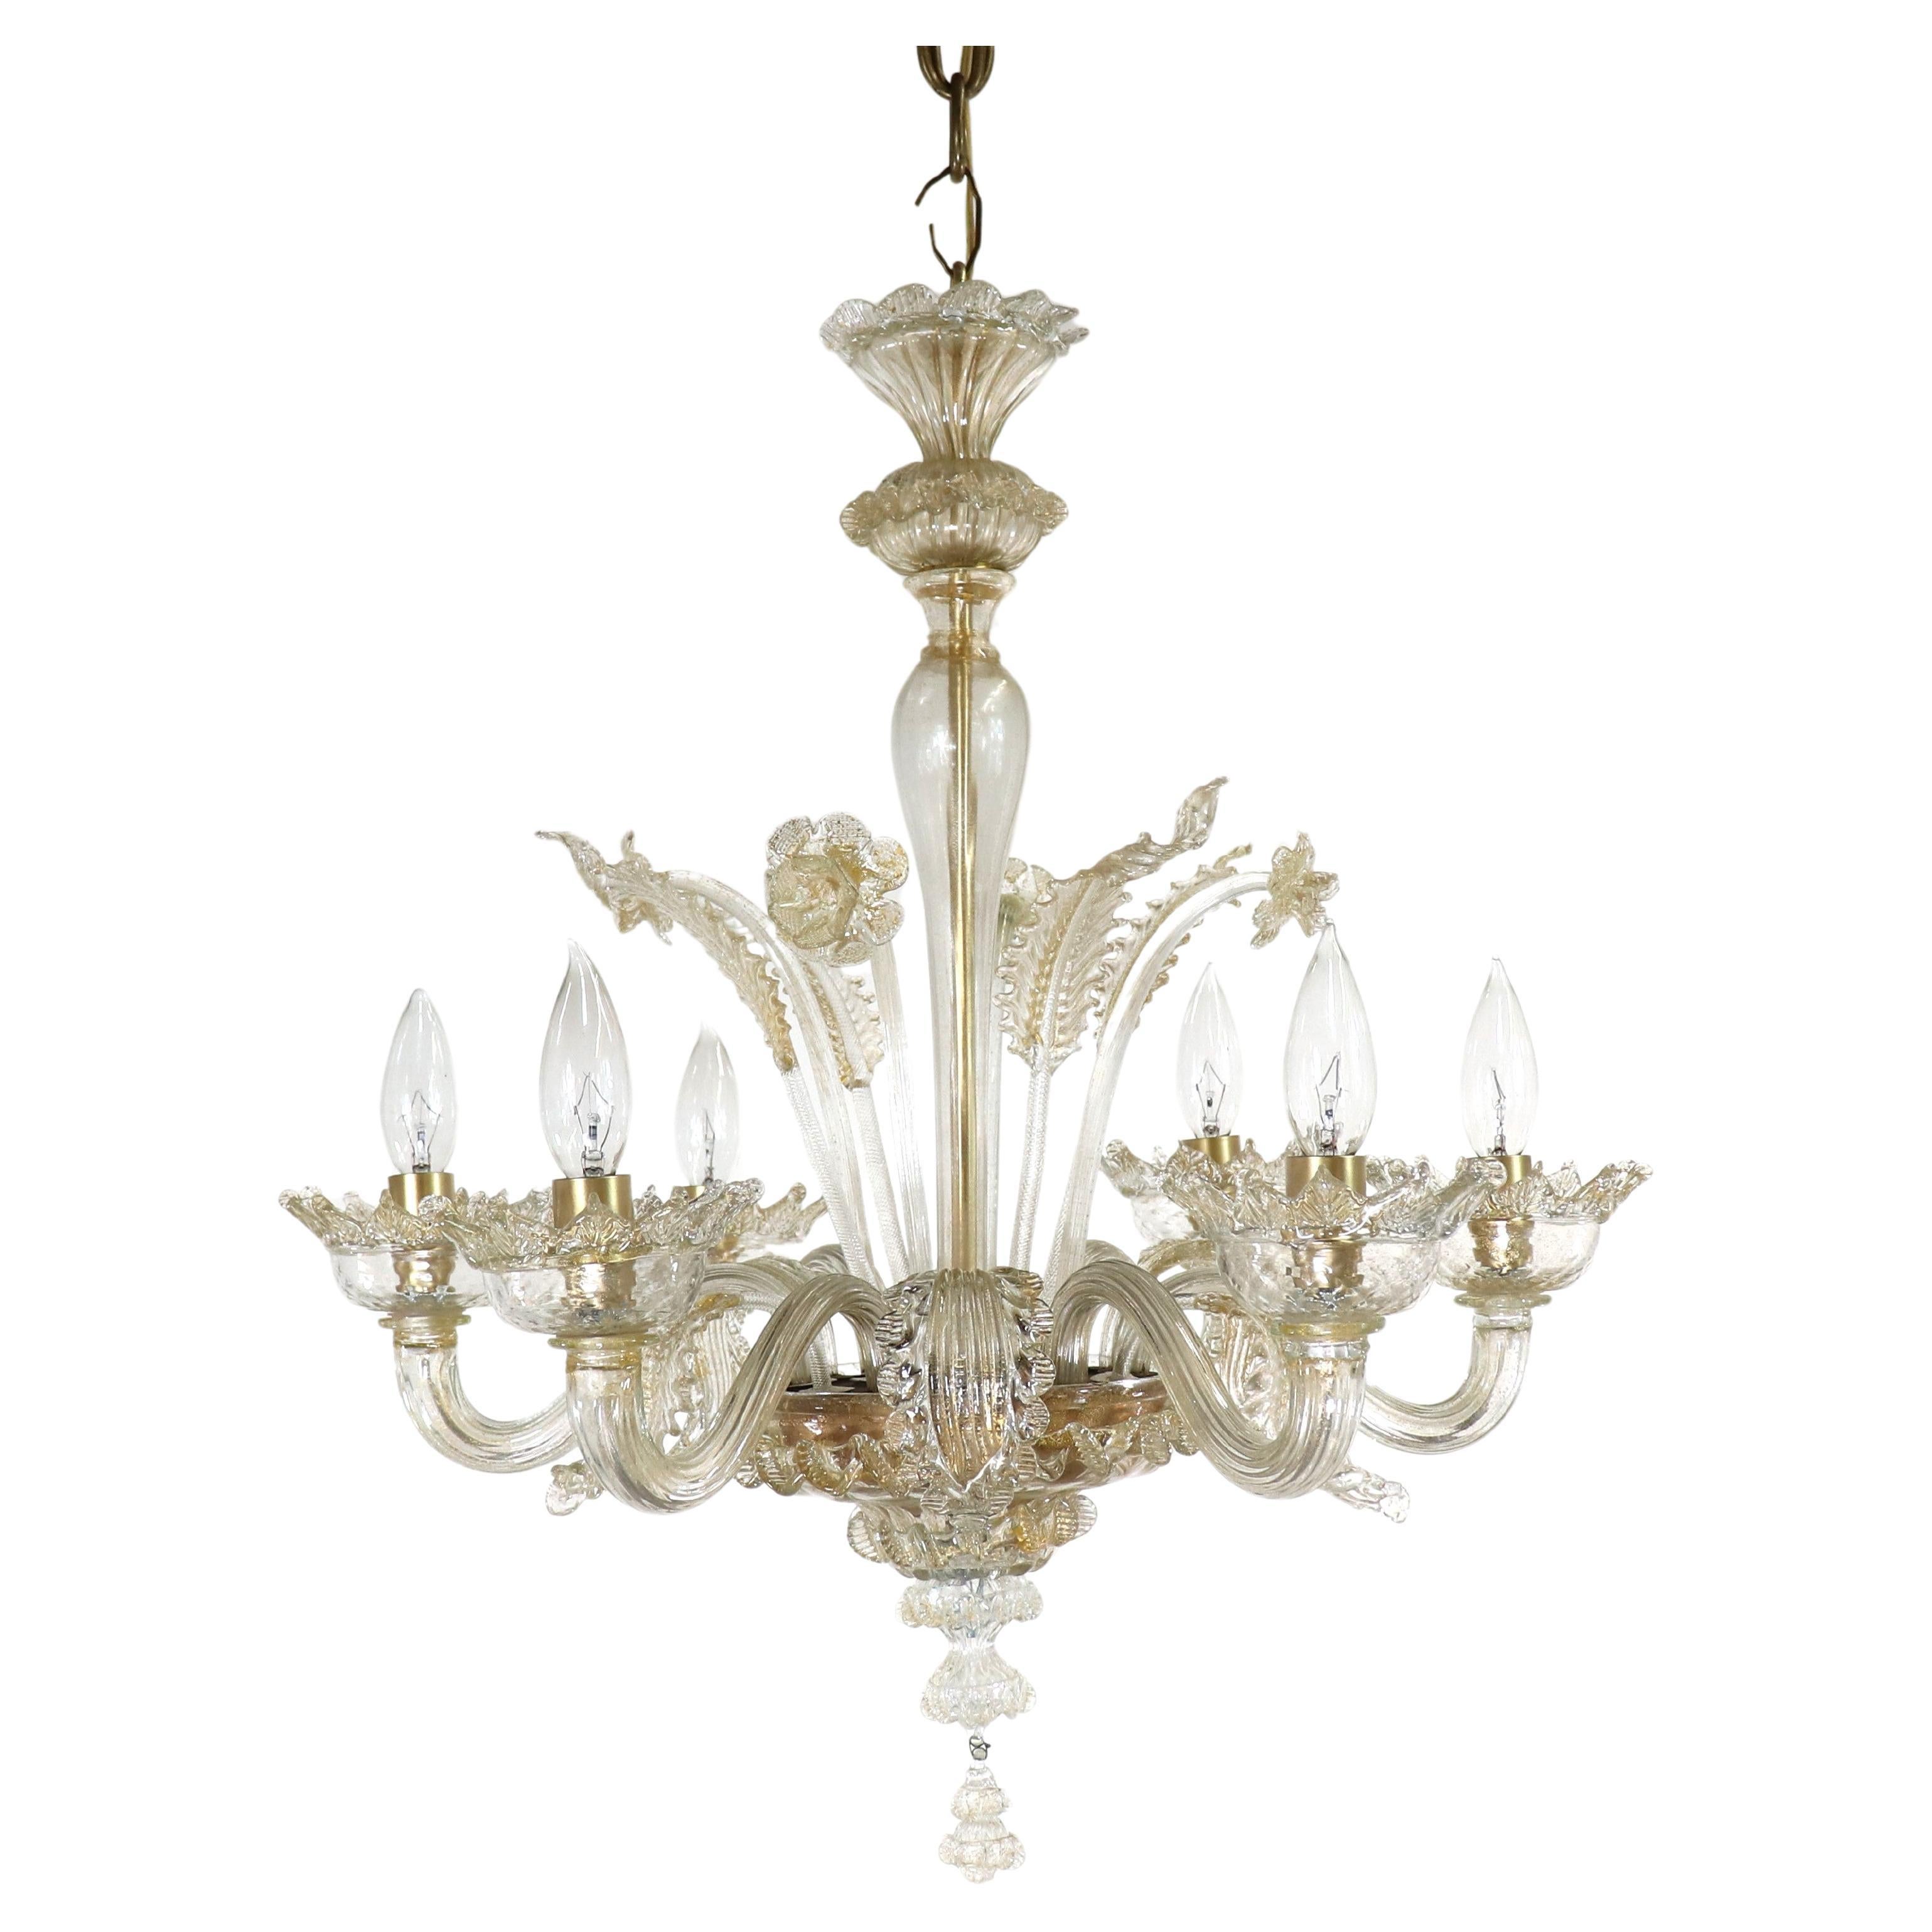  Vintage Baroque Style Gold Infused Cristallo Murano Chandelier For Sale